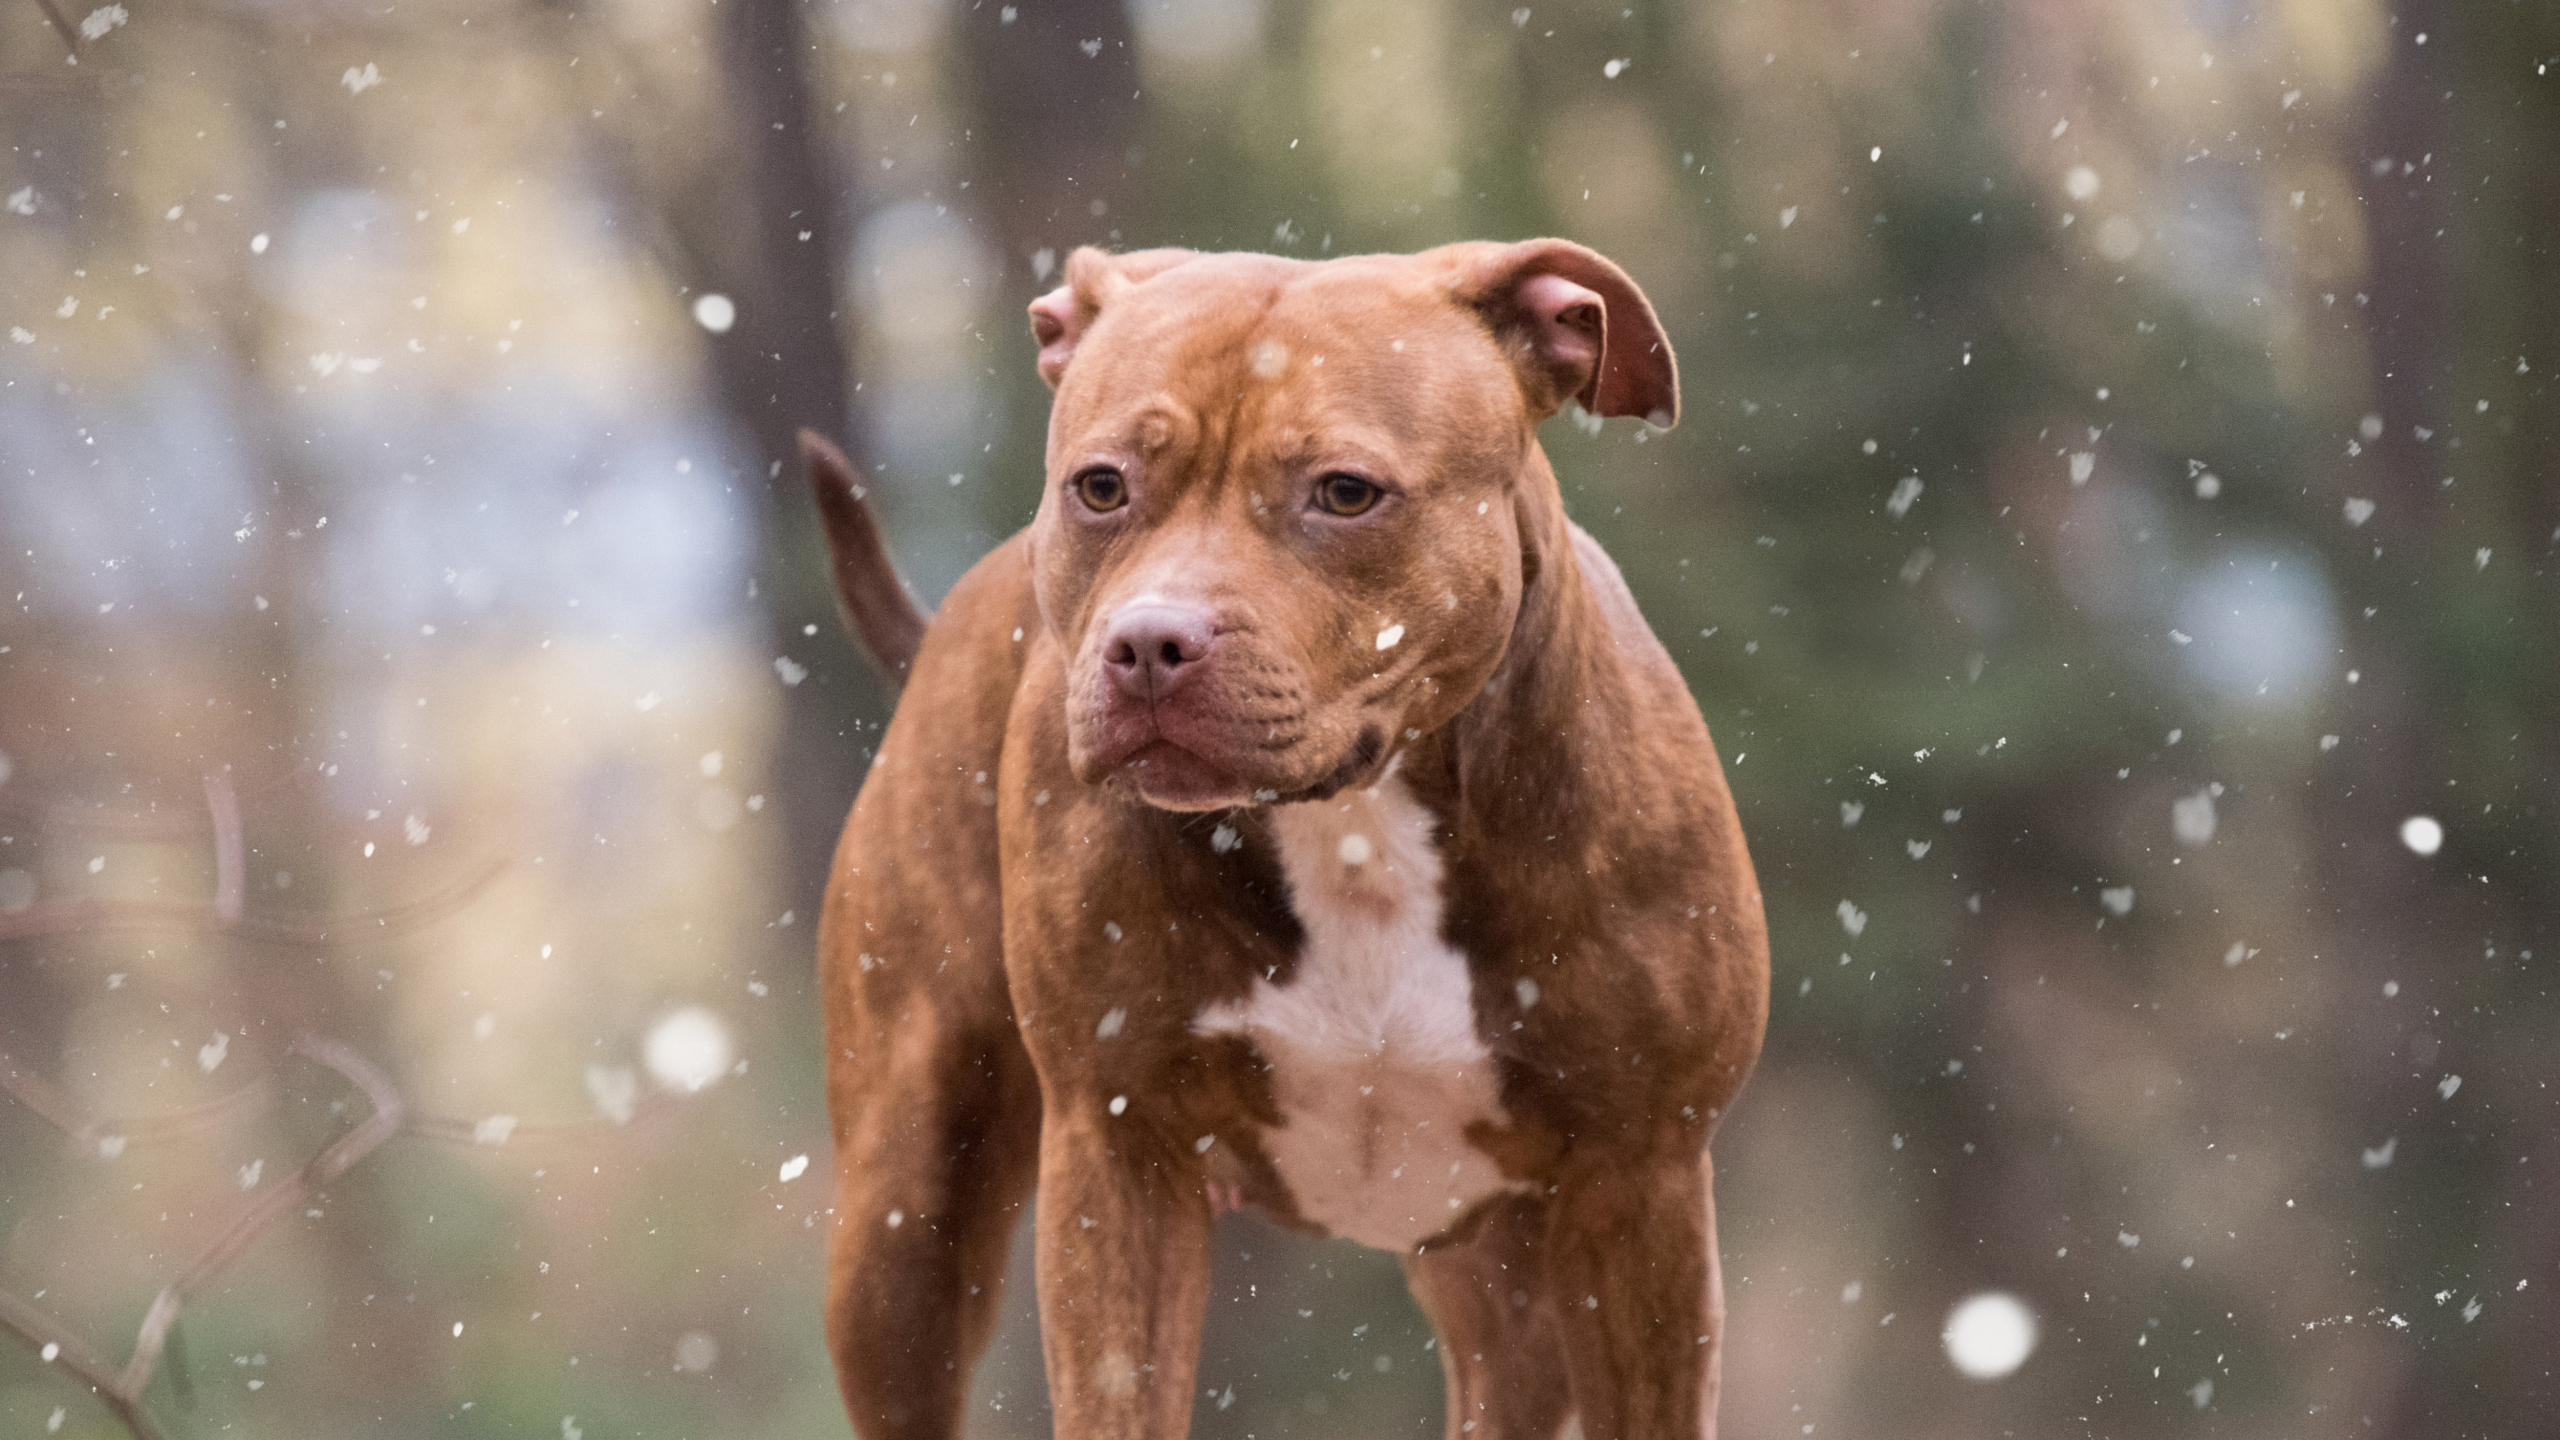 2560x1440 Download pit bull, dog, winter wallpaper, dual wide 16:9 hd image, background, 3742